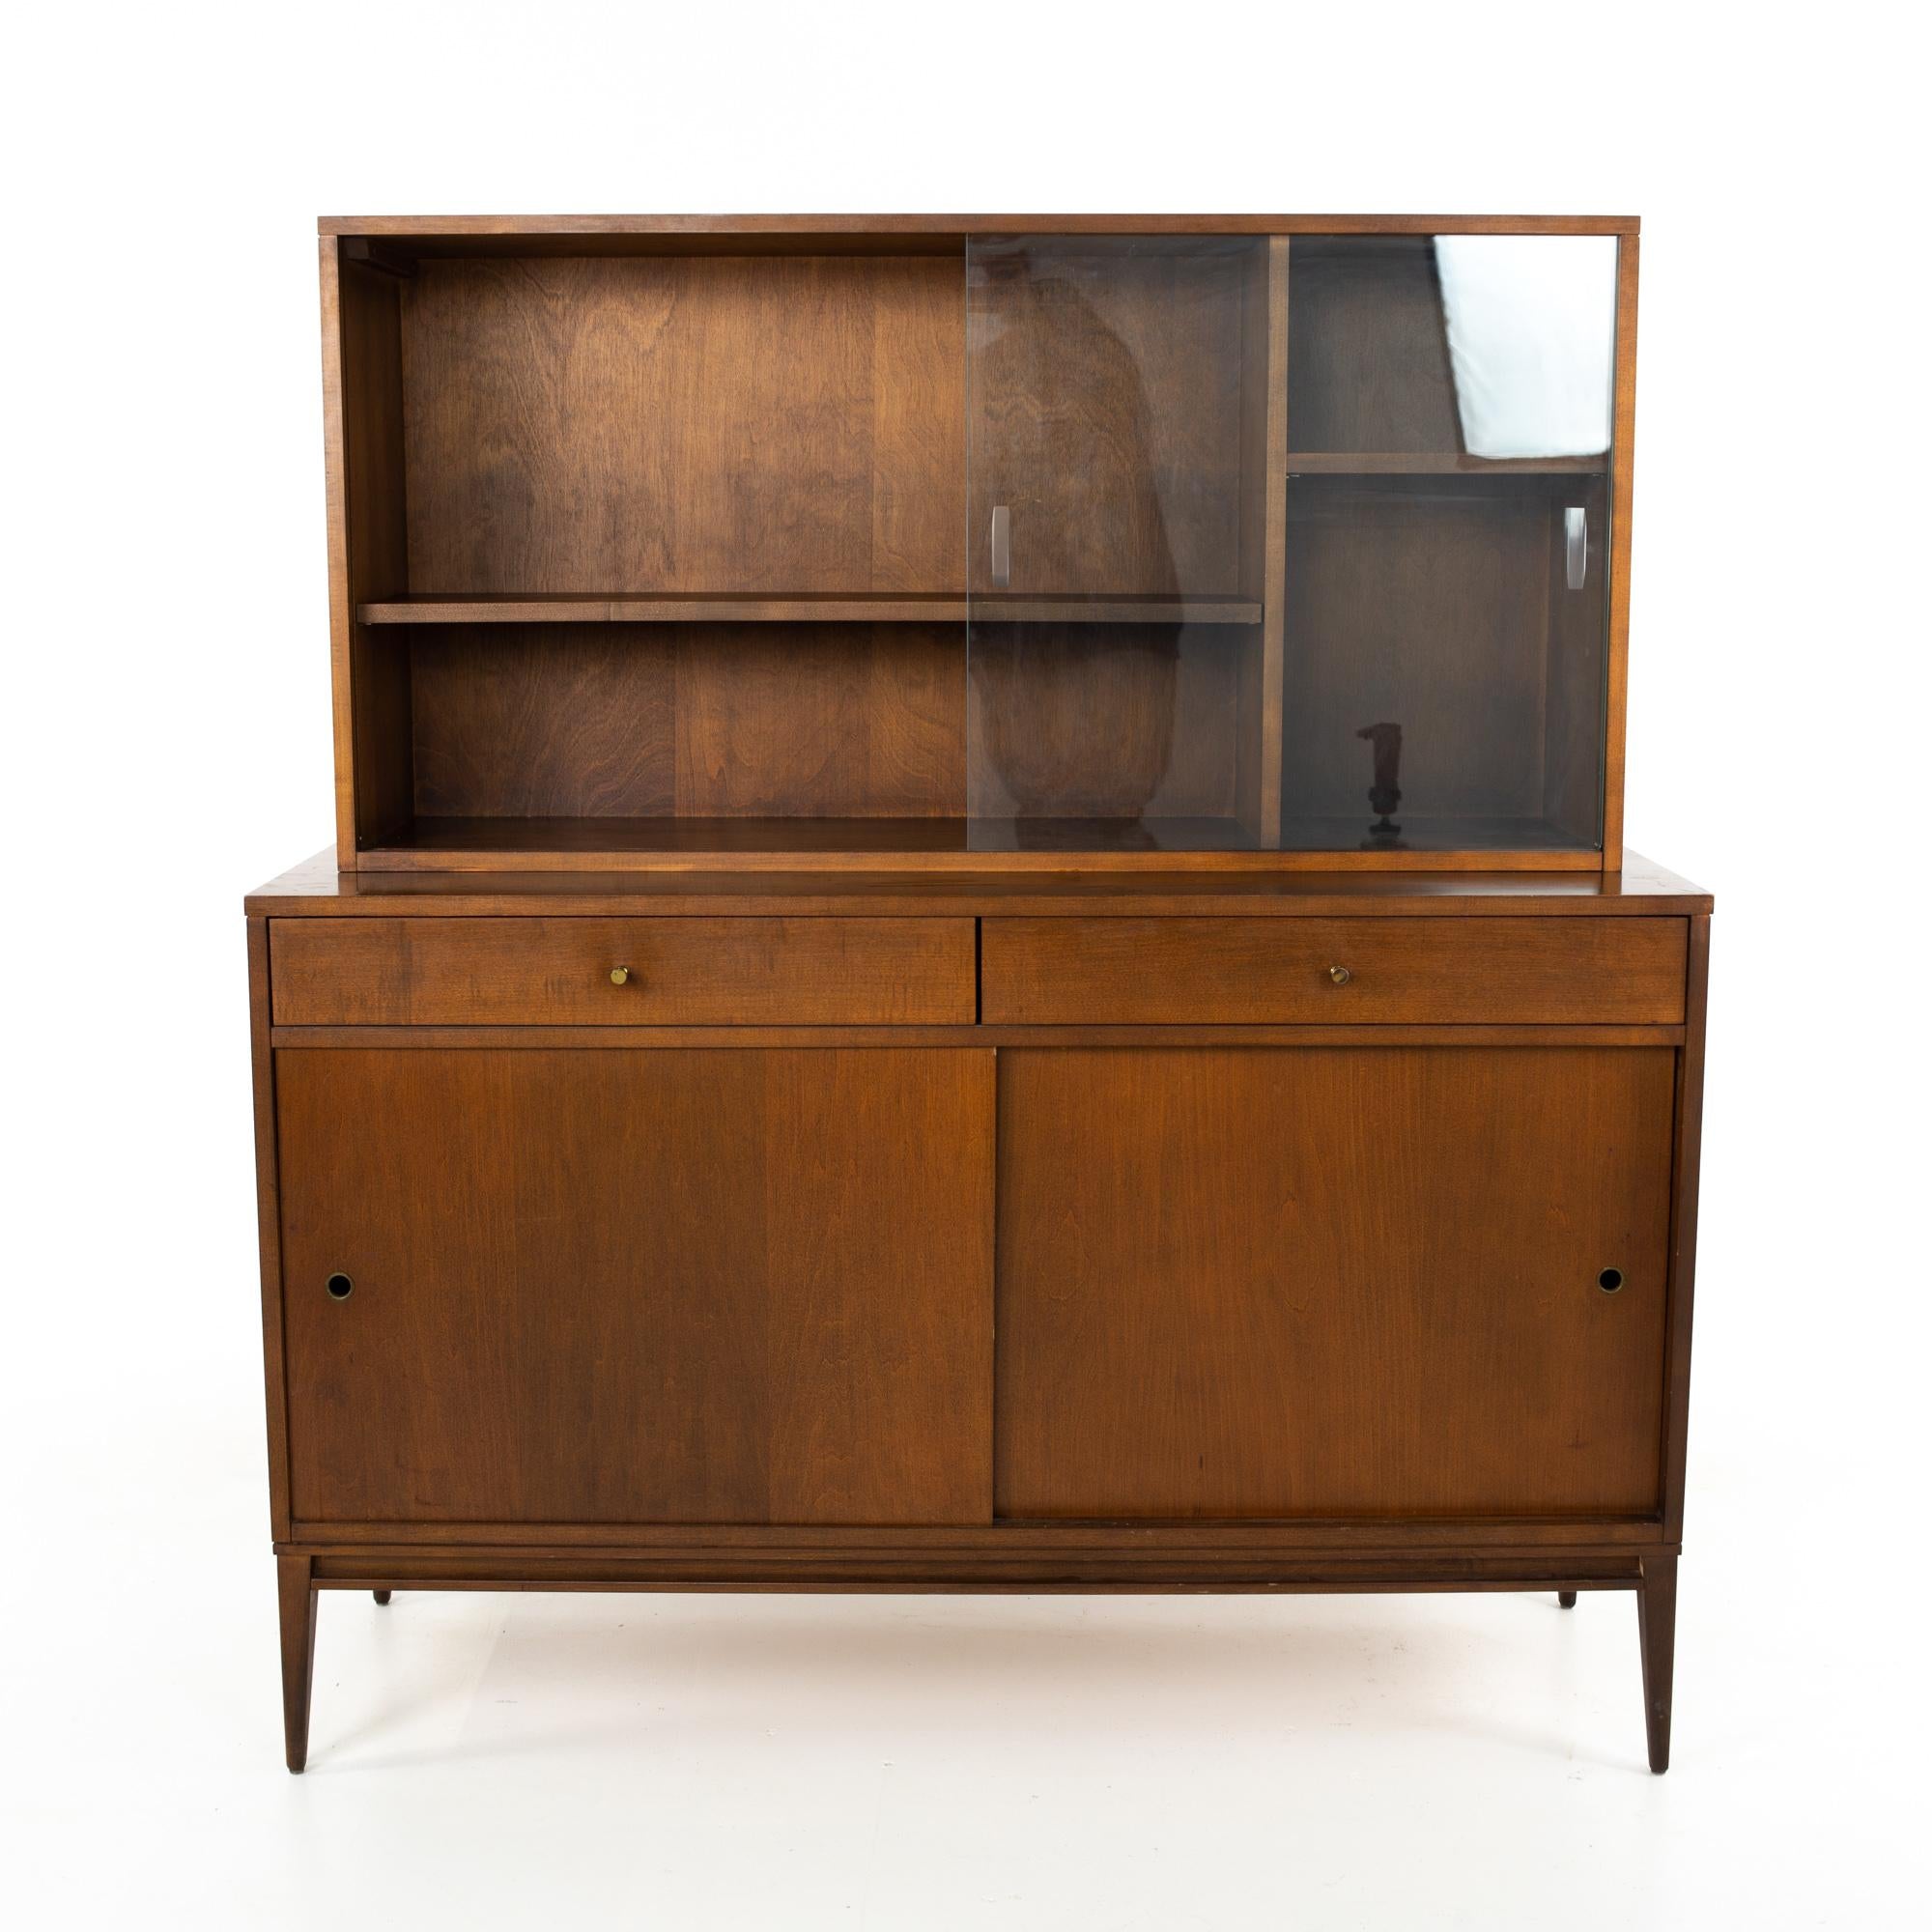 Paul McCobb for Planner Group midcentury solid wood sideboard credenza buffet and hutch
Buffet and hutch measure: 52.25 wide x 18.25 deep x 57.5 inches high

This price includes getting this piece in what we call restored vintage condition. That